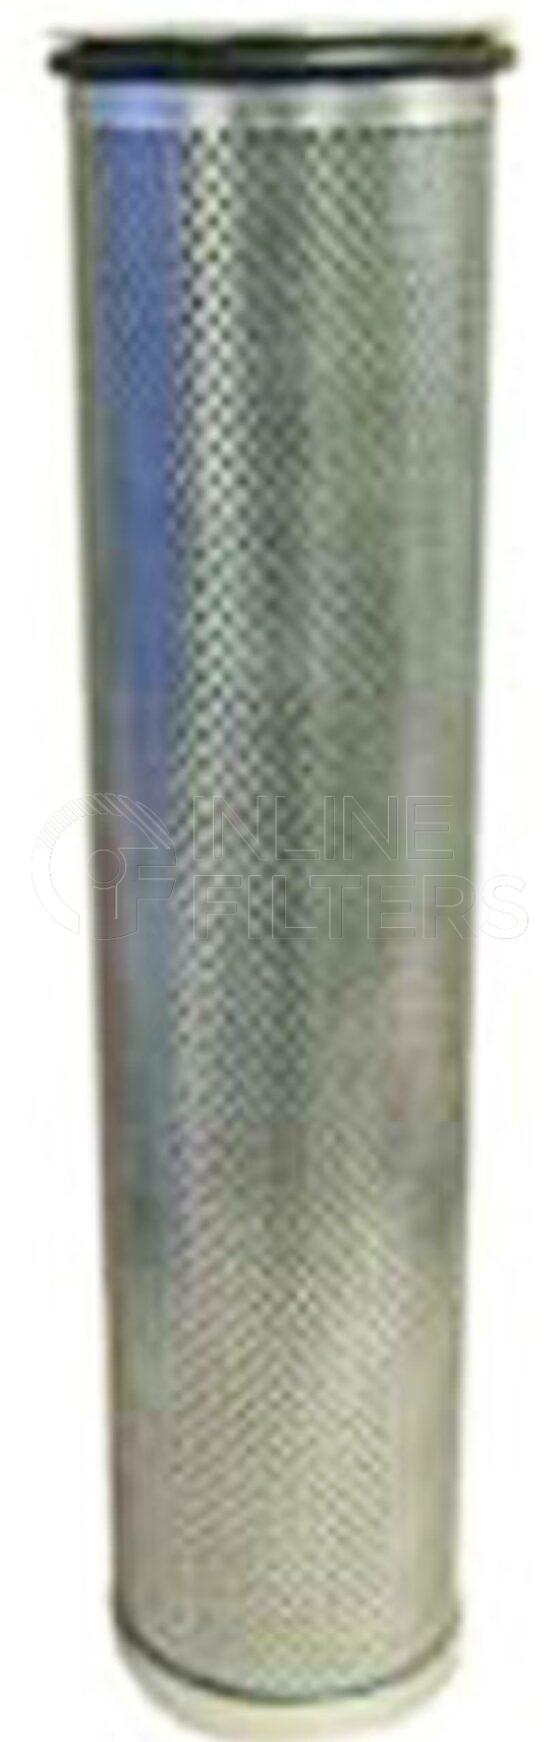 Inline FH50886. Hydraulic Filter Product – Cartridge – Flange Product Hydraulic filter product